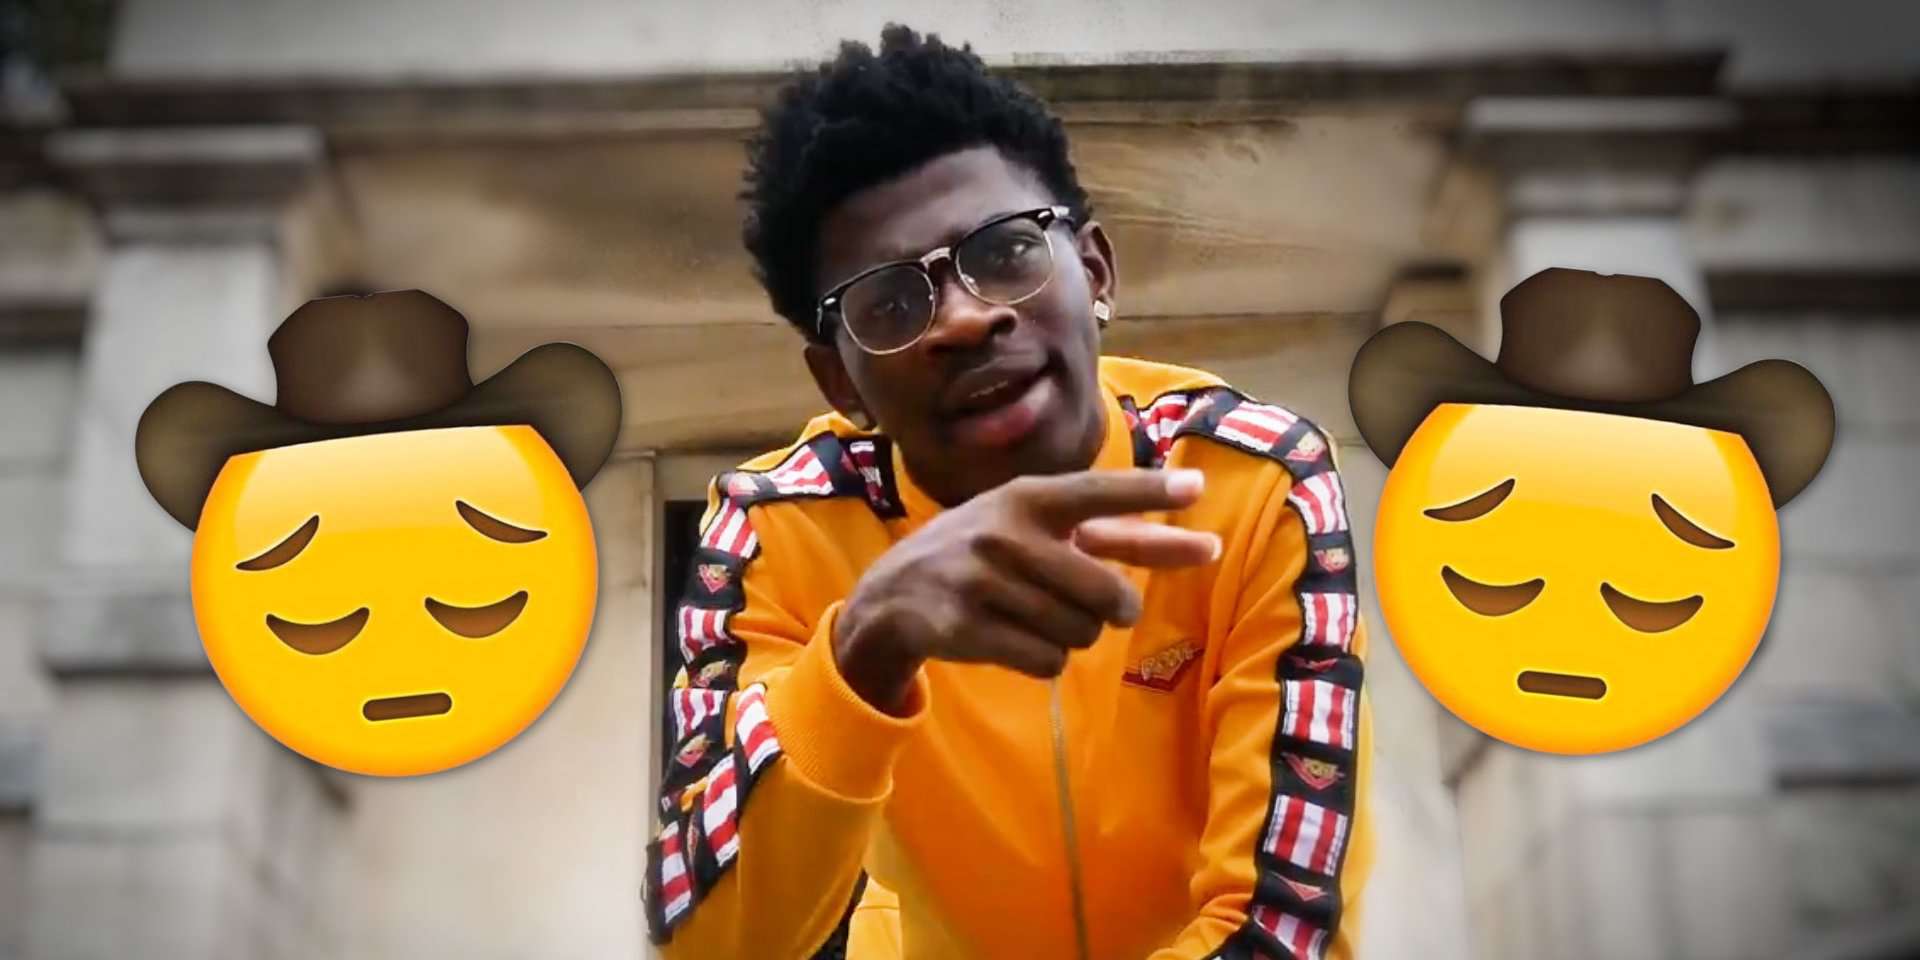 Taboola Ad Example 49978 - How Lil Nas X’s "Old Town Road" Took Over The Internet